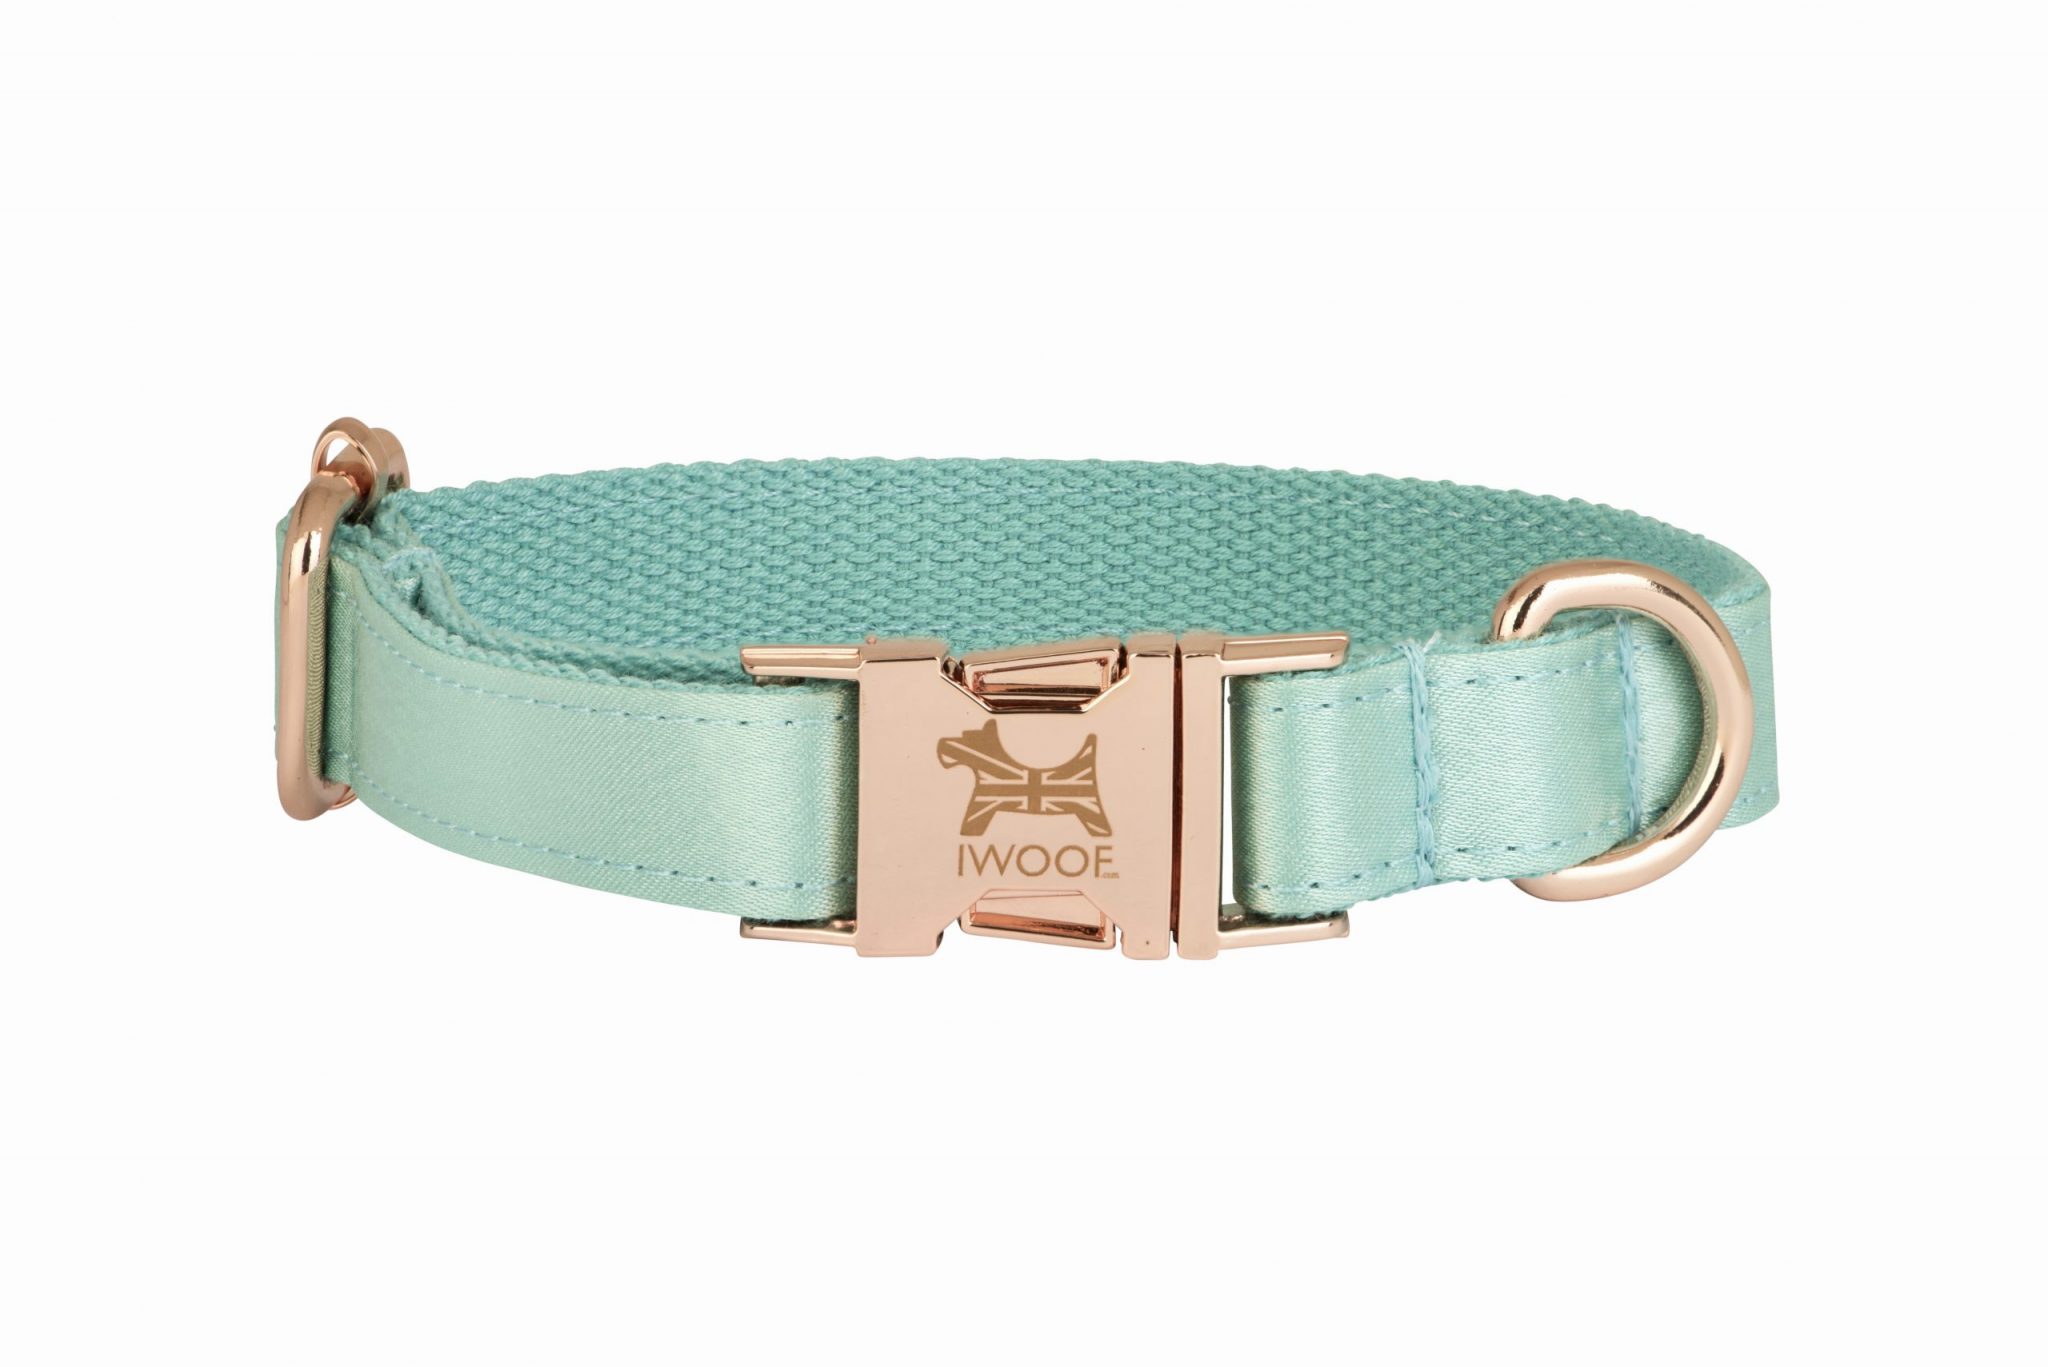 Ace dog collar in jade and rose gold